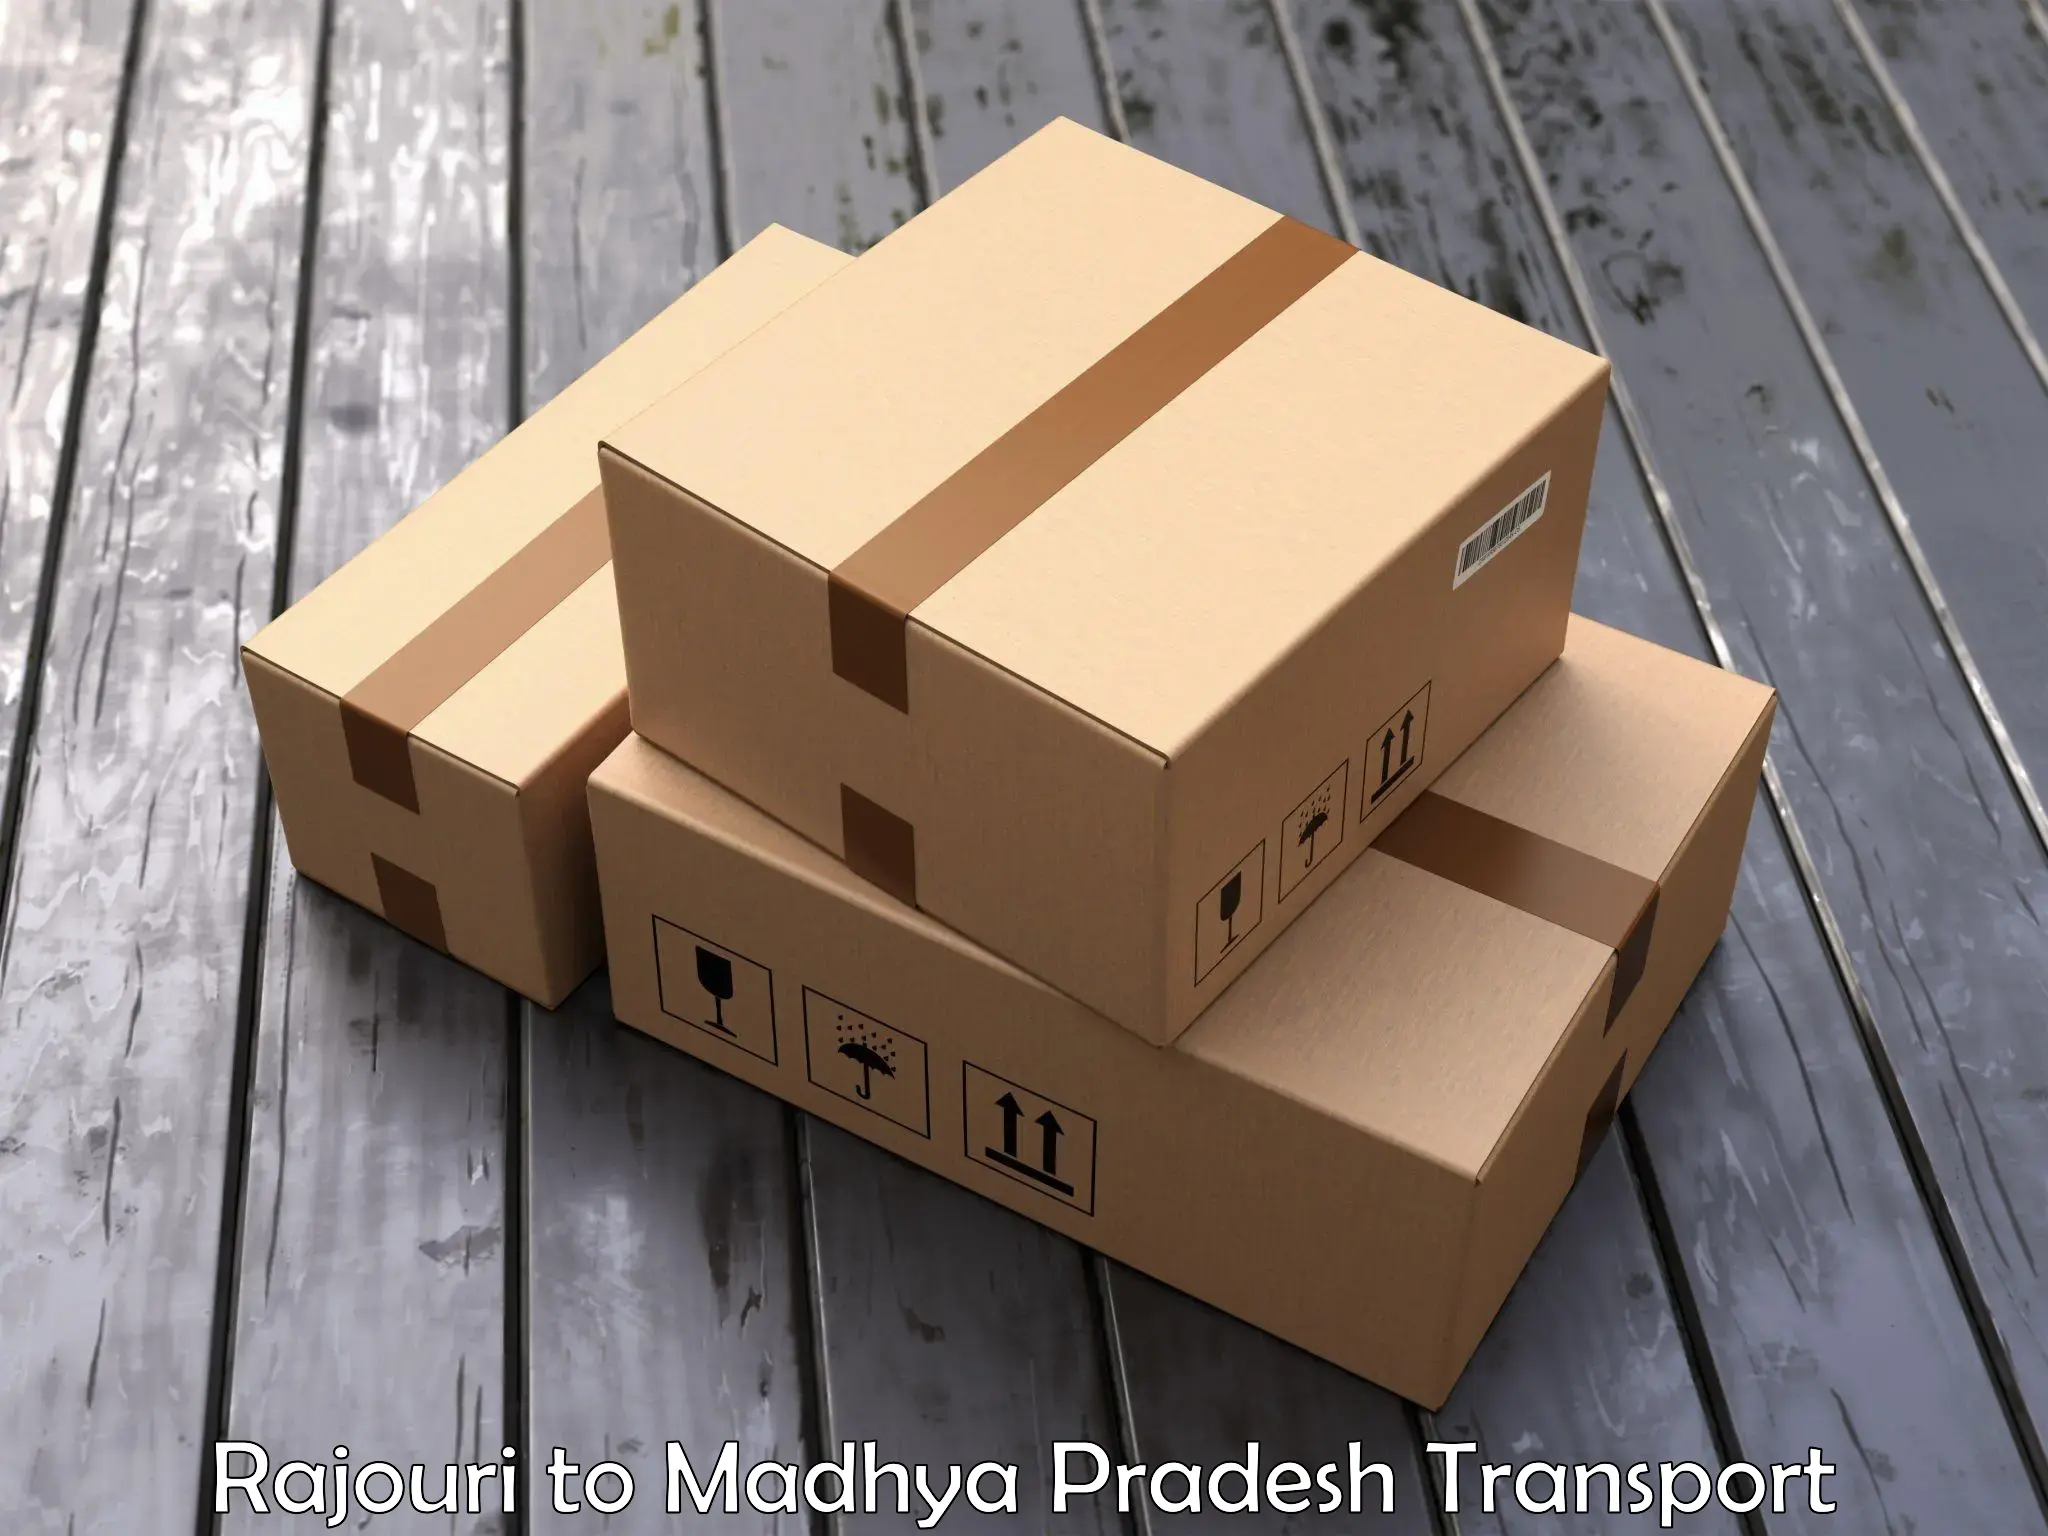 Land transport services Rajouri to Neemuch